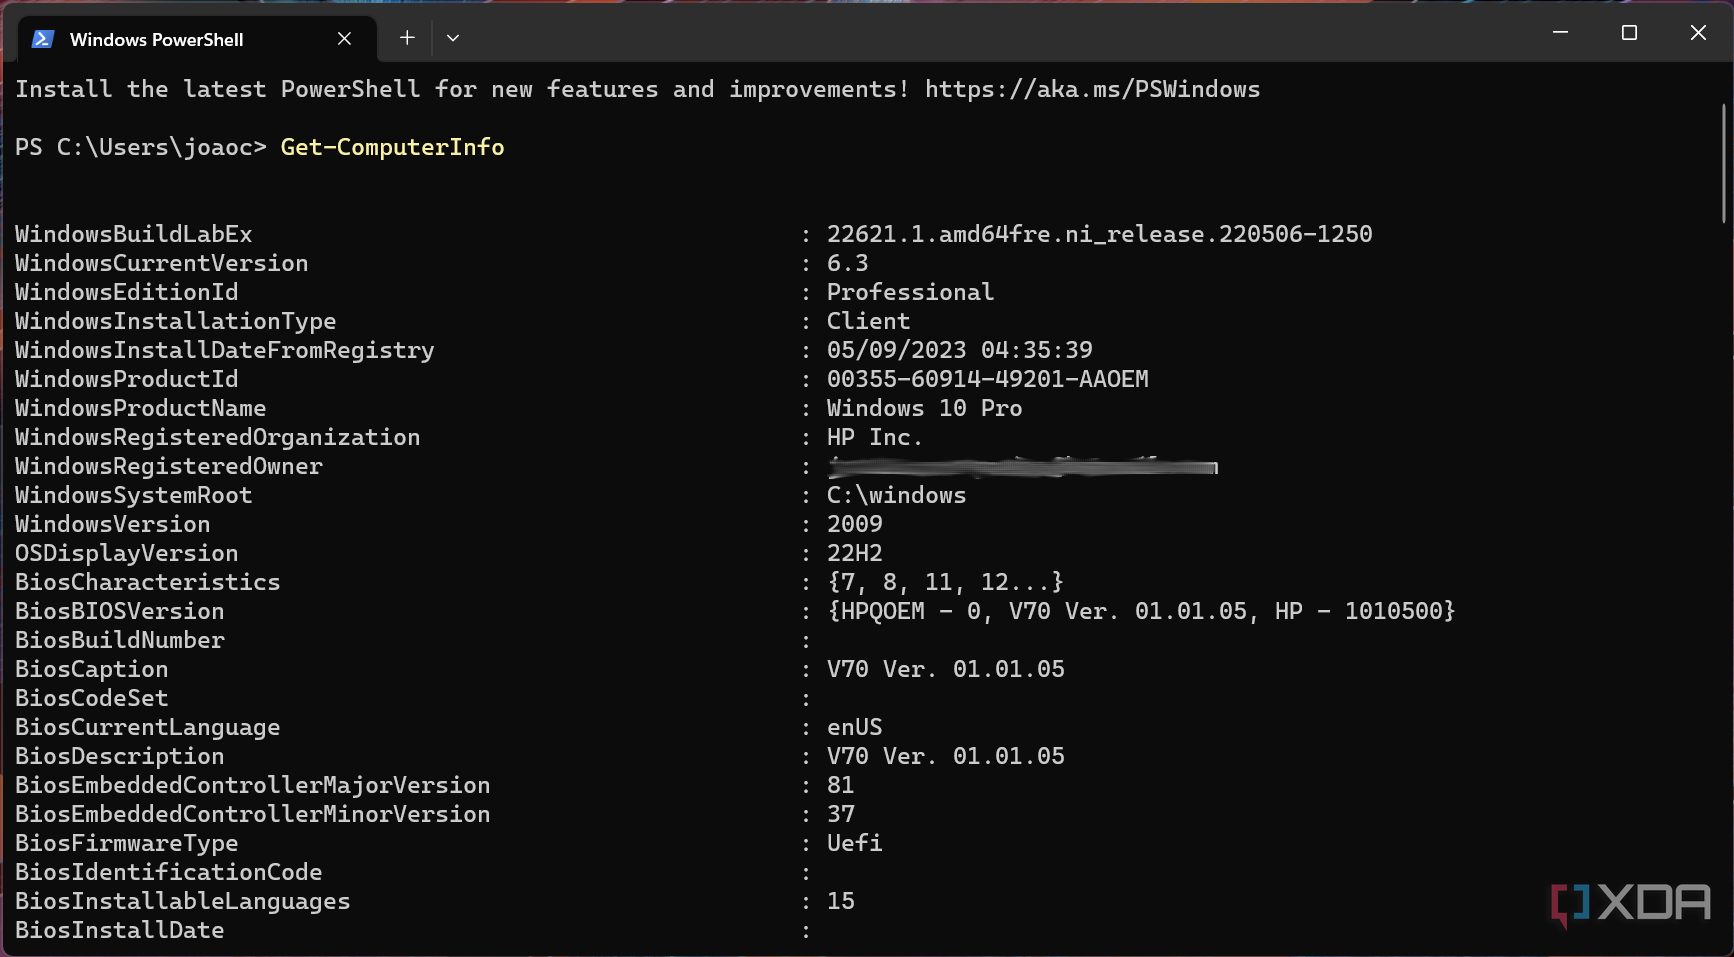 Screenshot of Windows PowerShell in Terminal after running the Get-ComputerInfo command